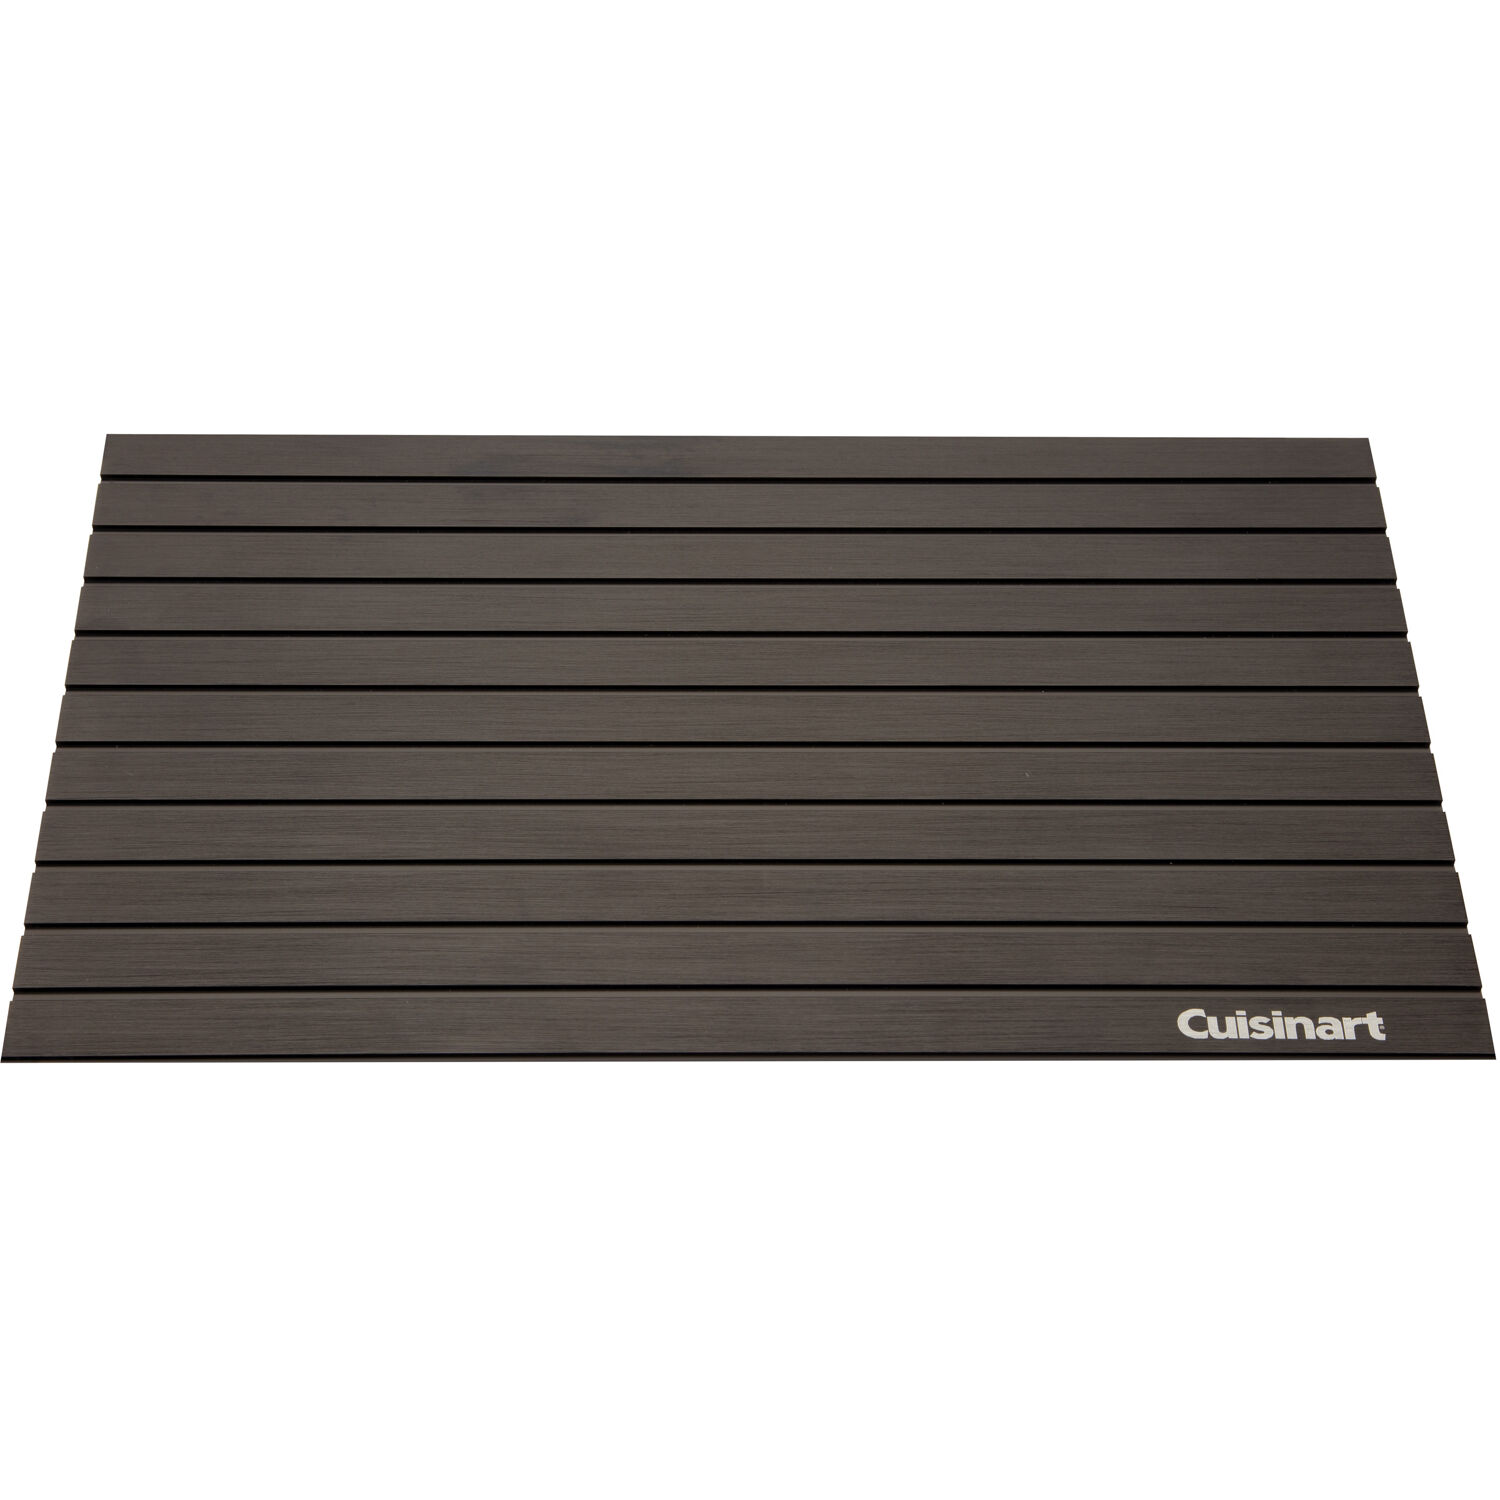 Cuisinart BBQ Defrosting Tray - image 2 of 9